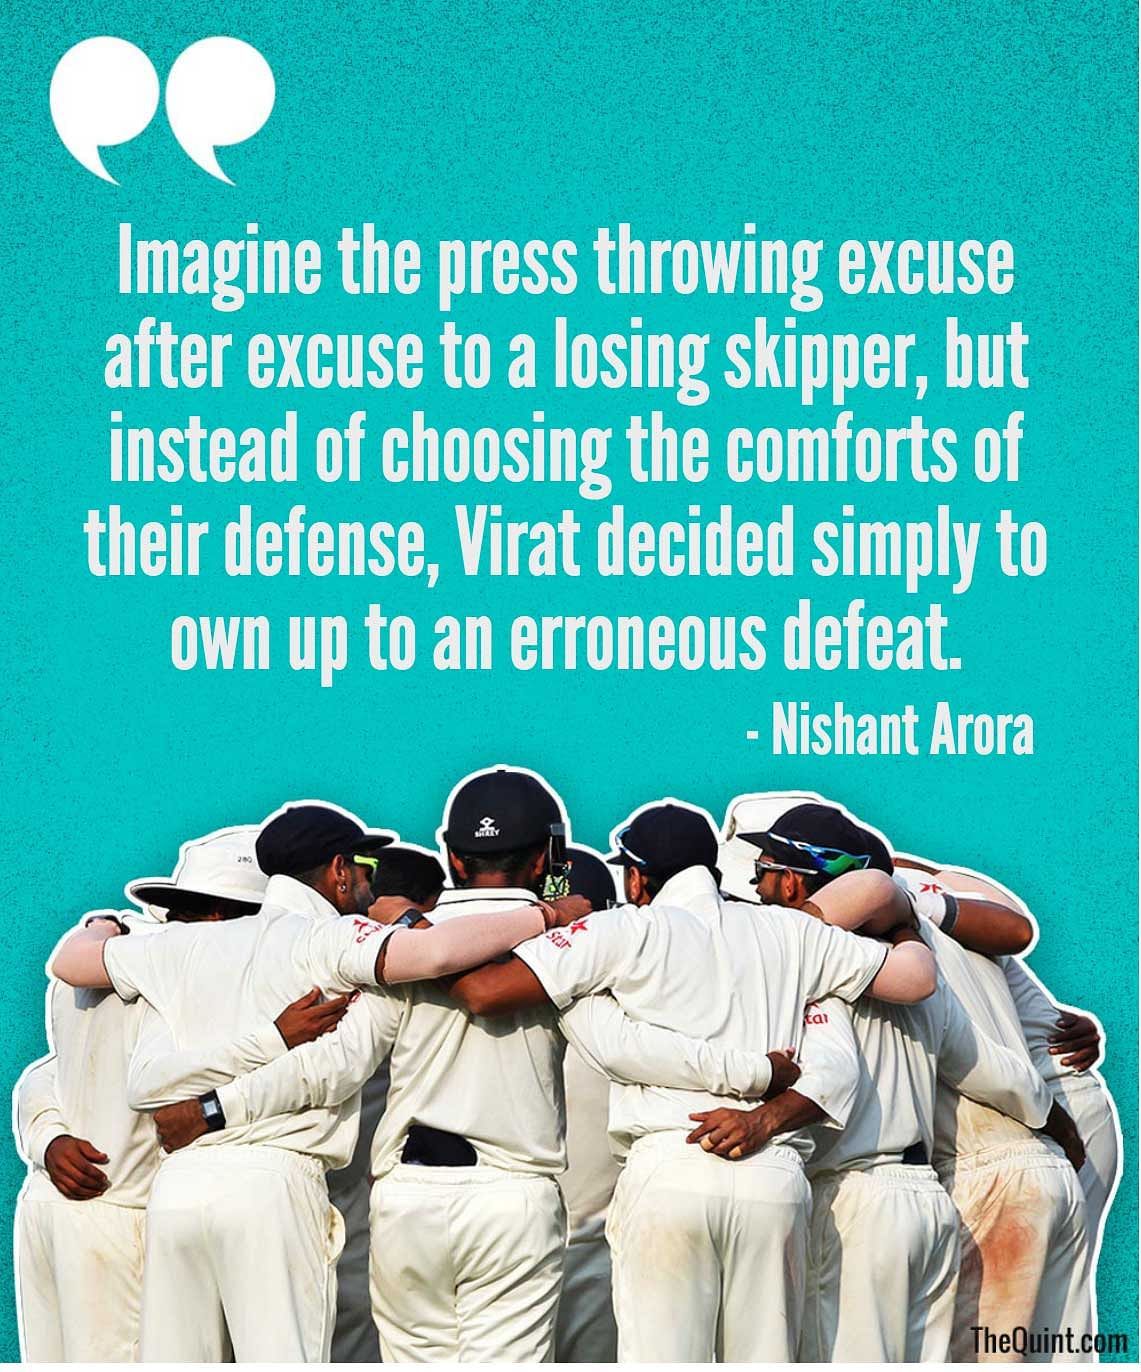 On 15 August 2015, Virat & his men liberated themselves from inner & outer restrictions, writes Nishant Arora.